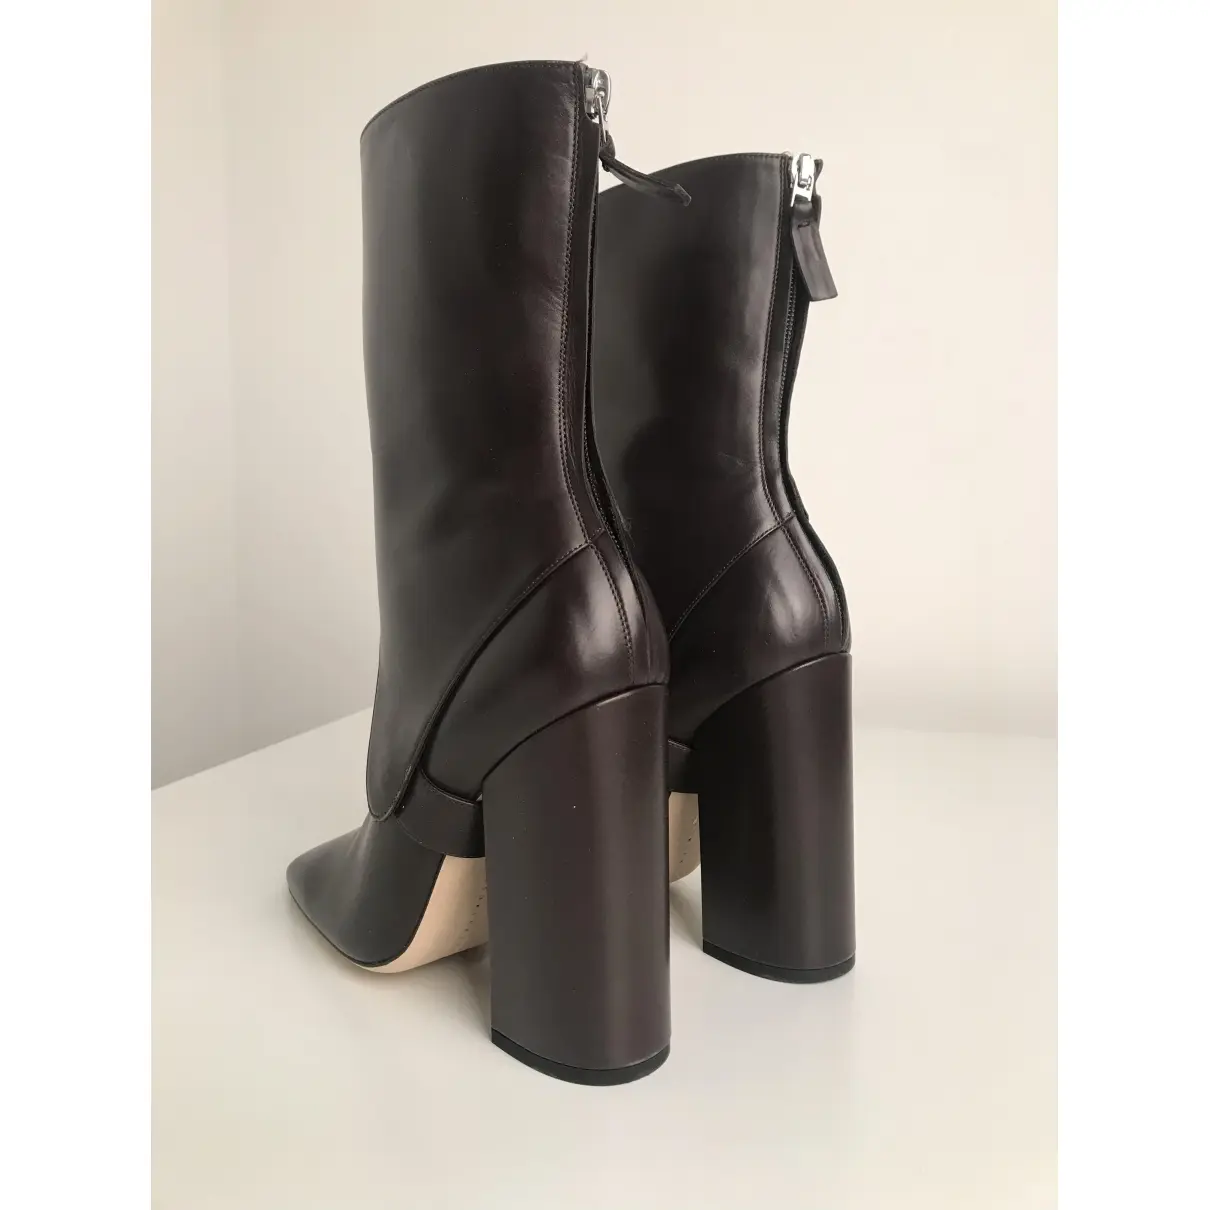 Victoria Beckham Leather boots for sale